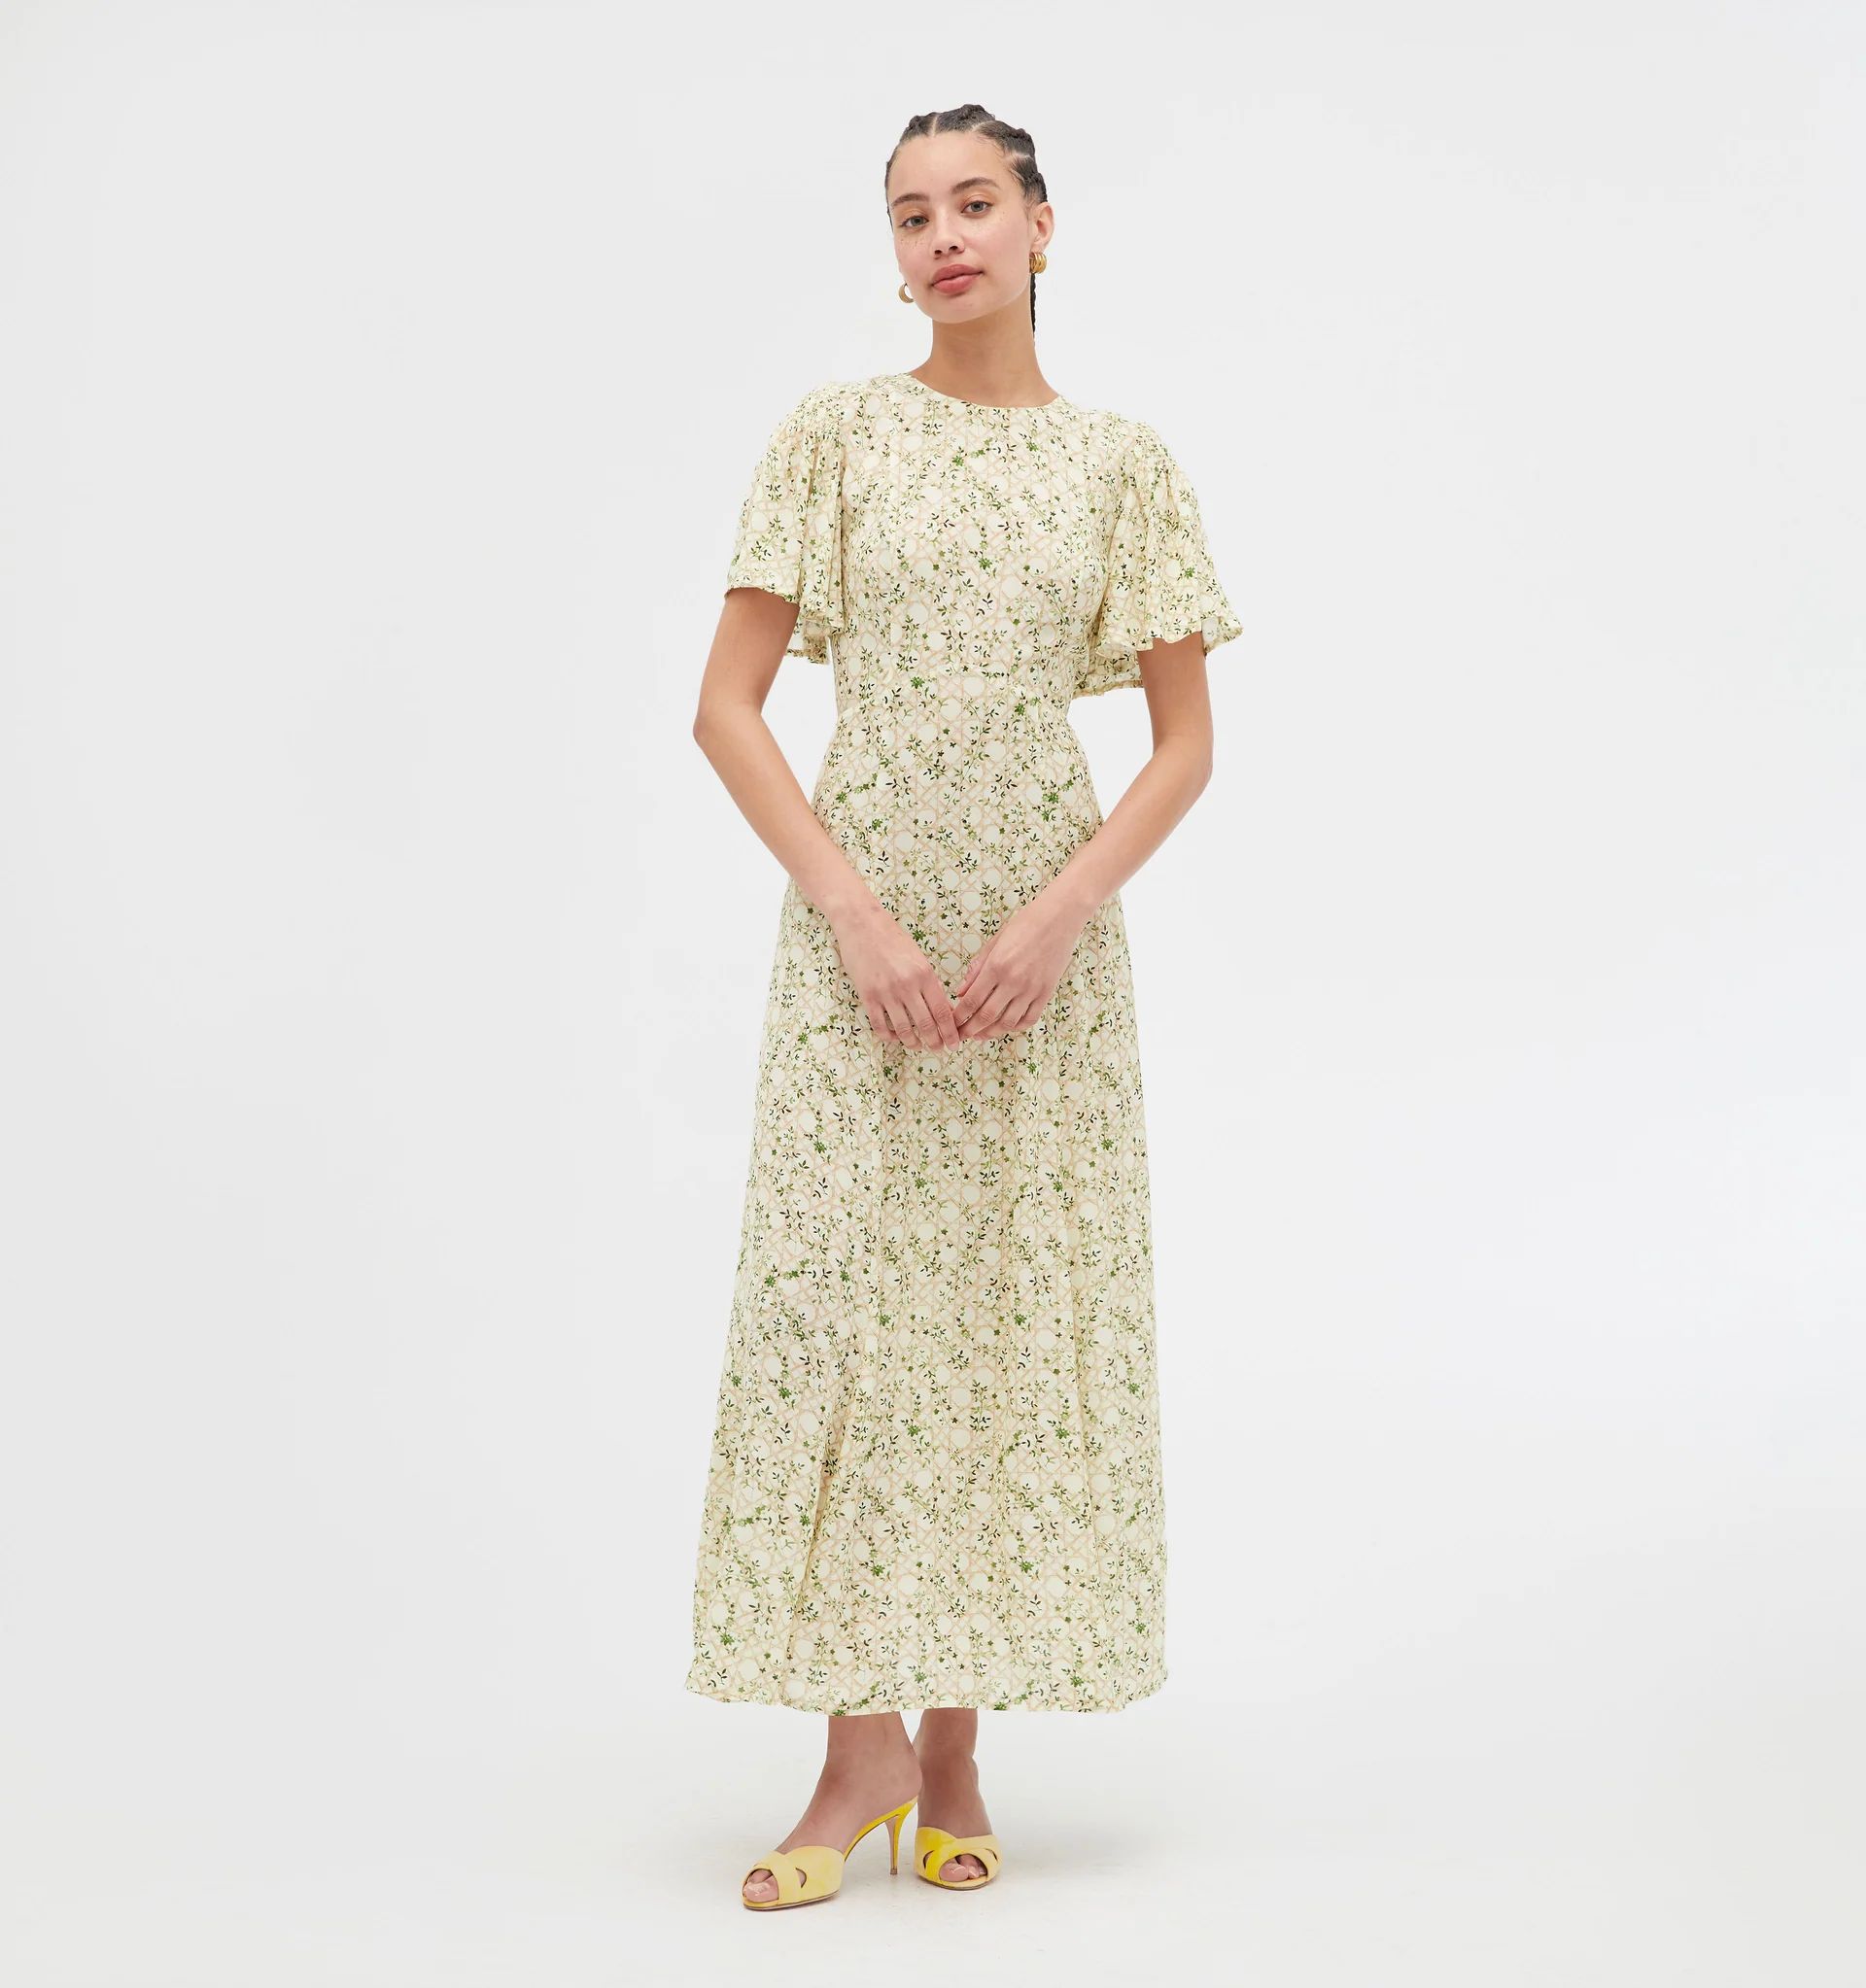 The Dominique Dress - Yellow Basketweave Vine | Hill House Home